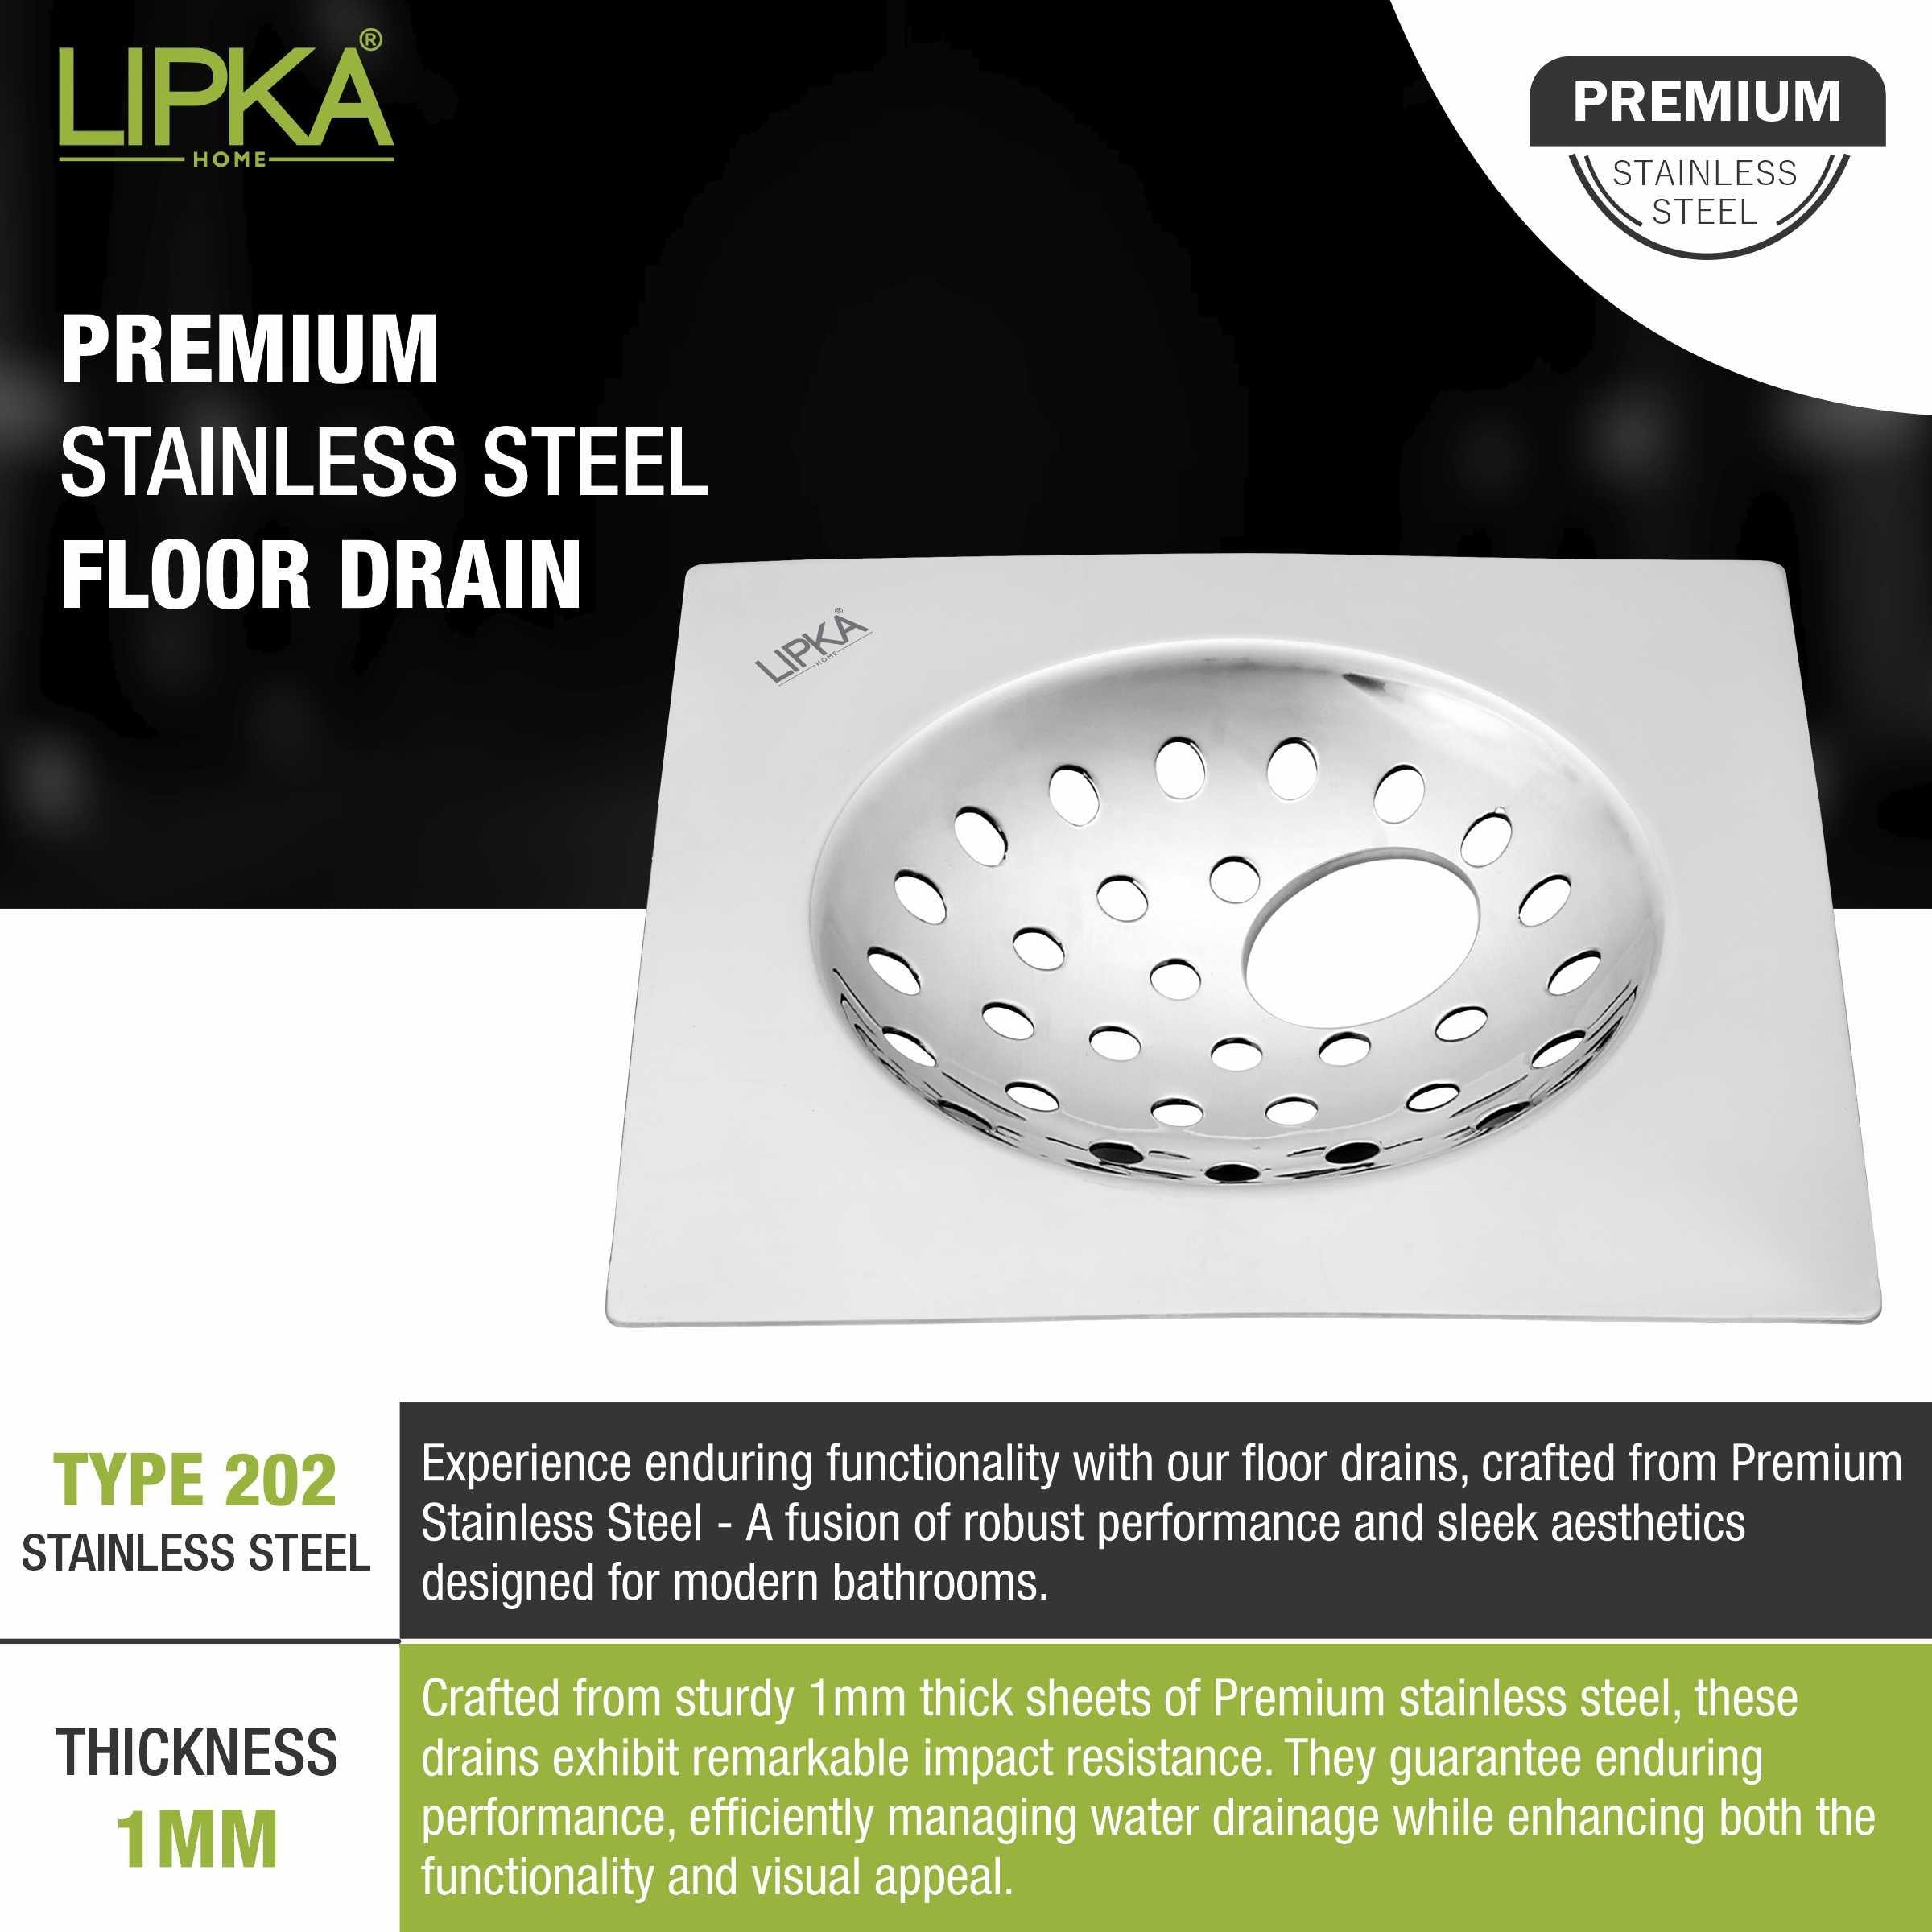 UNO Square Flat Cut Floor Drain (6 x 6 Inches) with Hole - LIPKA